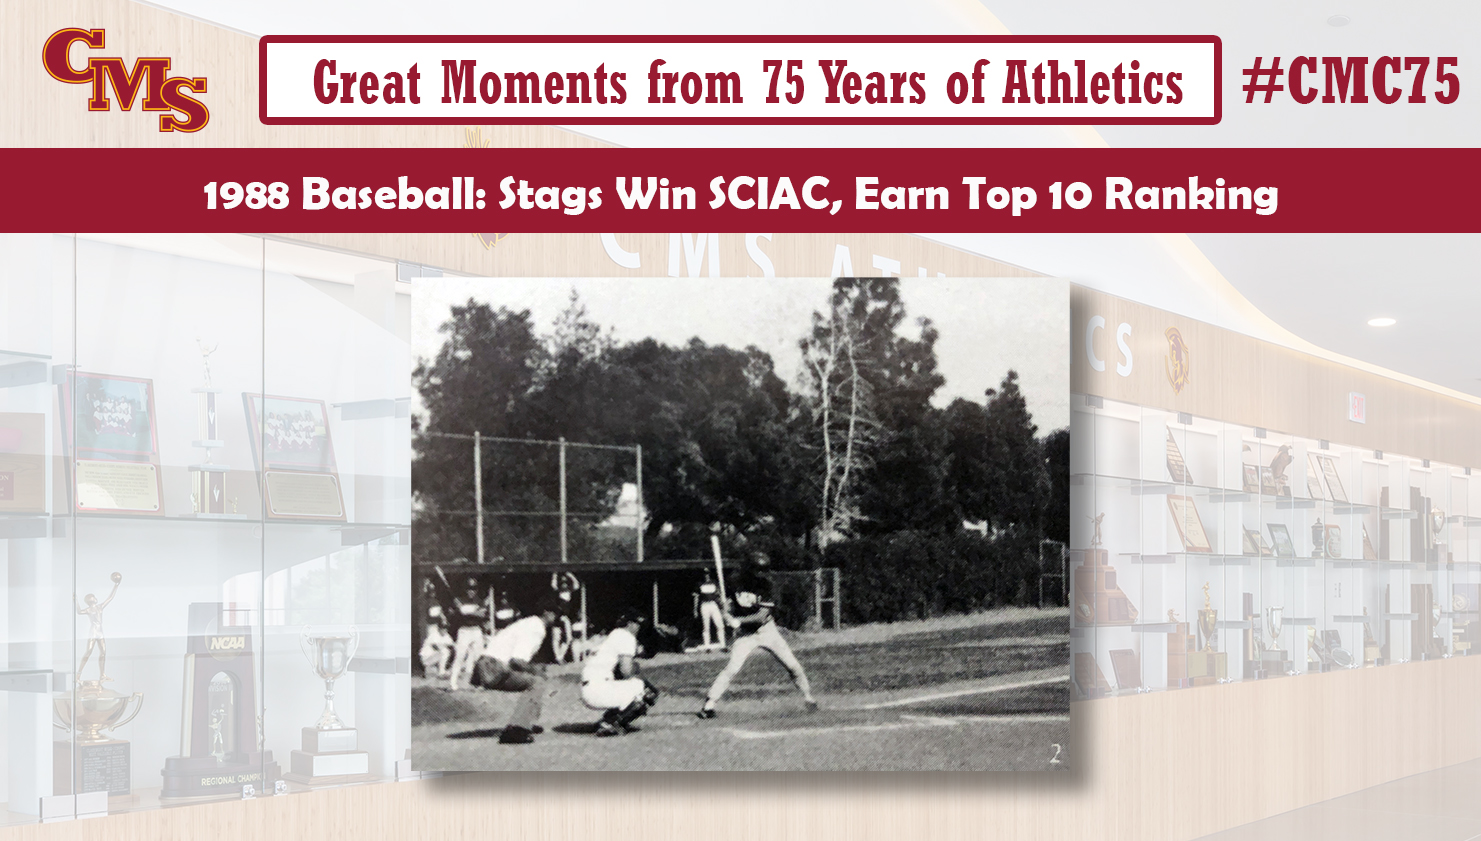 A 1988 Baseball Action shot. Words over the photo read: Great Moments from 75 Years of Athletics, 1988 Baseball: Stags Win SCIAC, Earn Top 10 Ranking